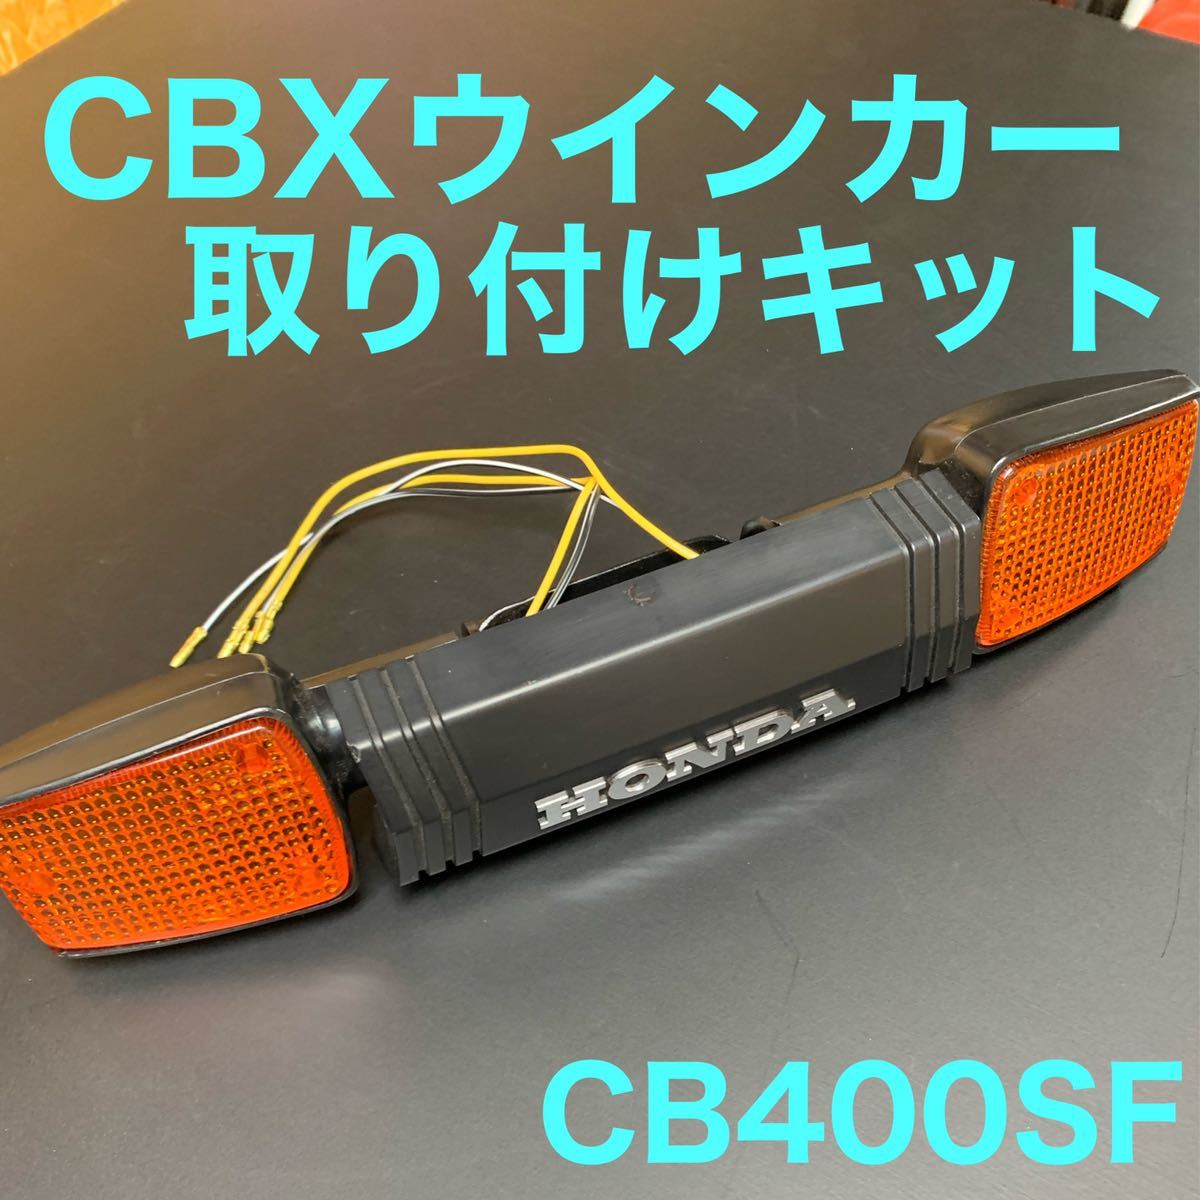 CB400SF NC39CBXウインカー取り付けキット